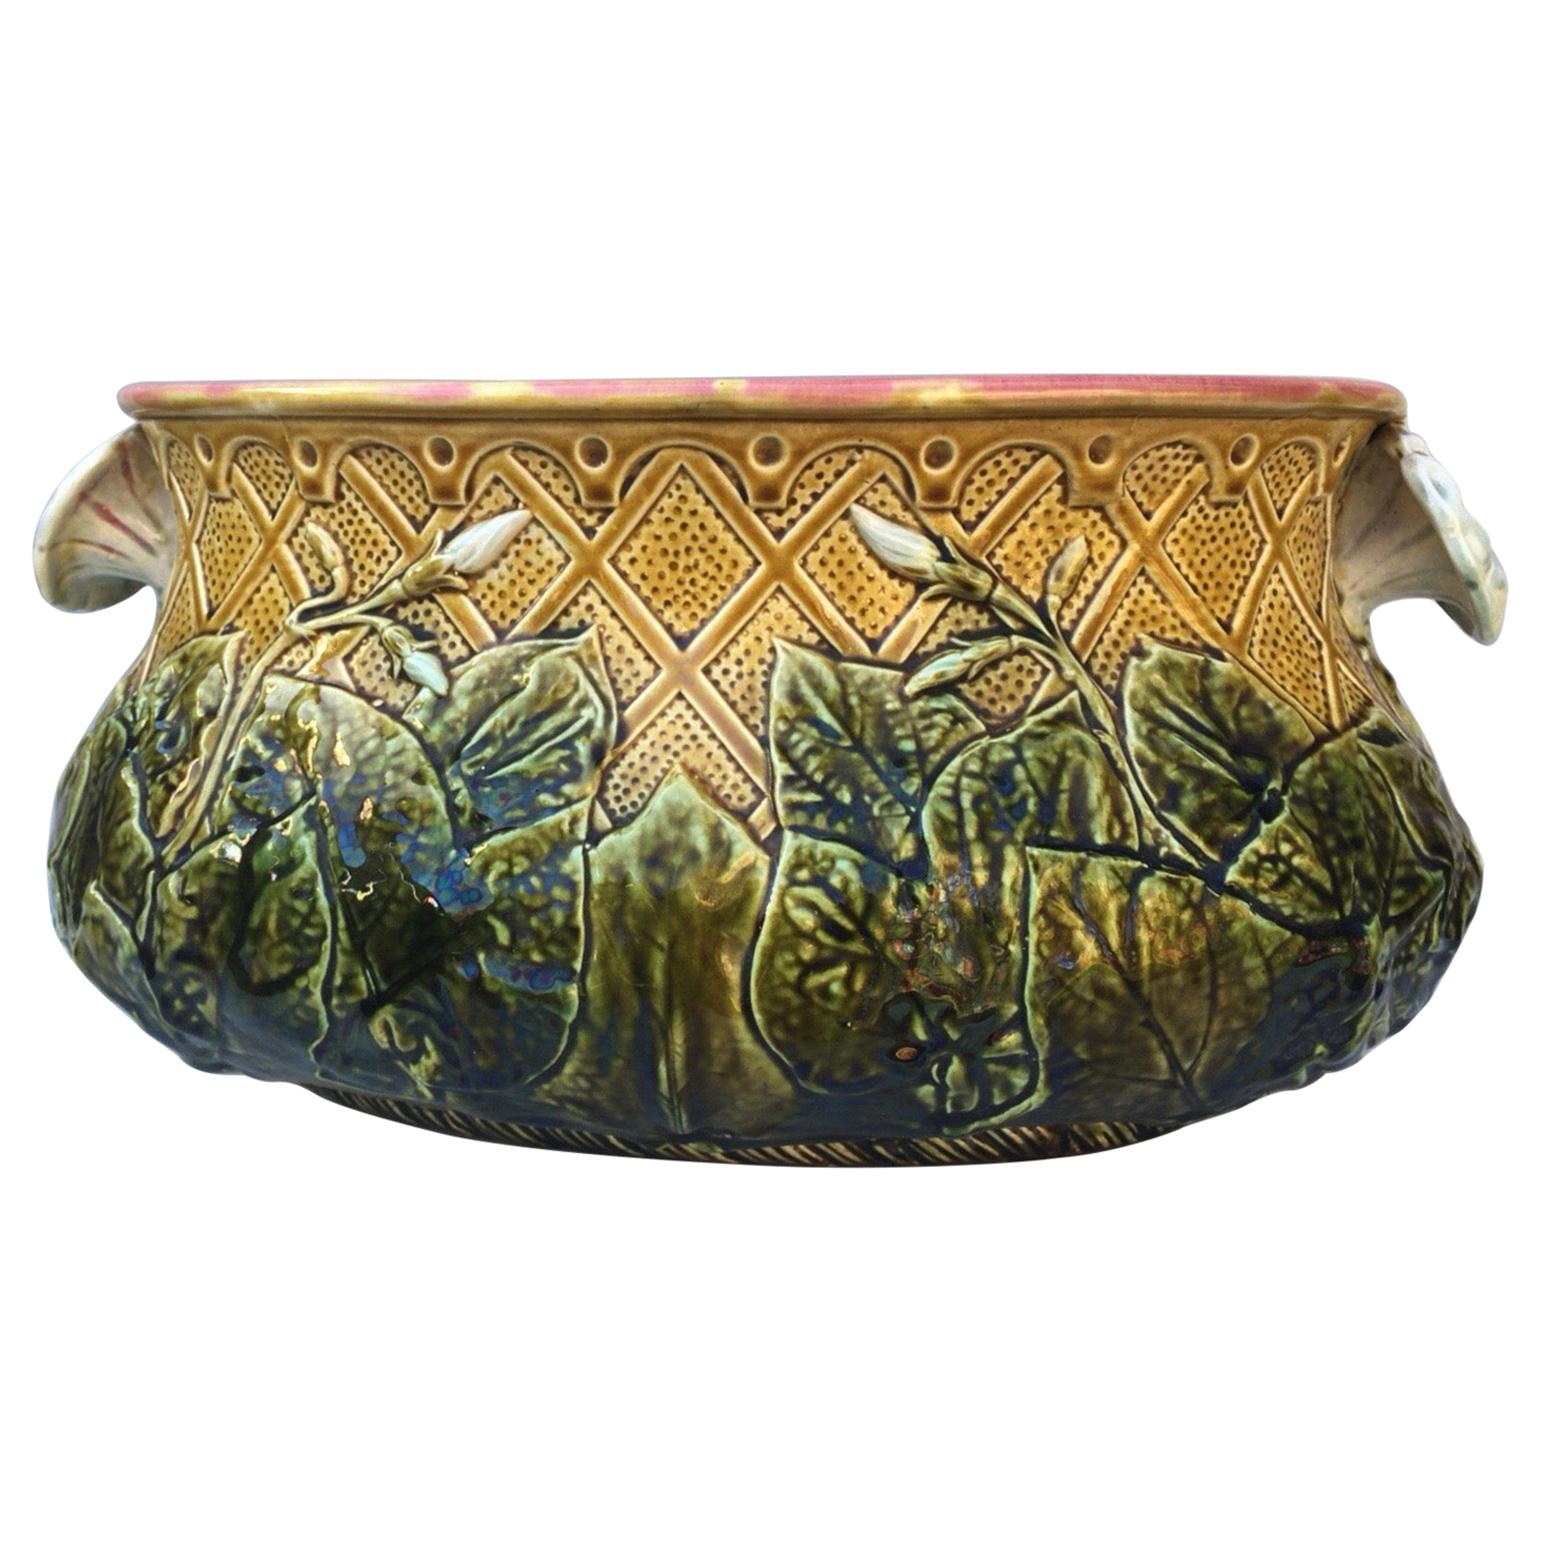 Large Continental Neoclassical Hand Painted Jardinière or Planter